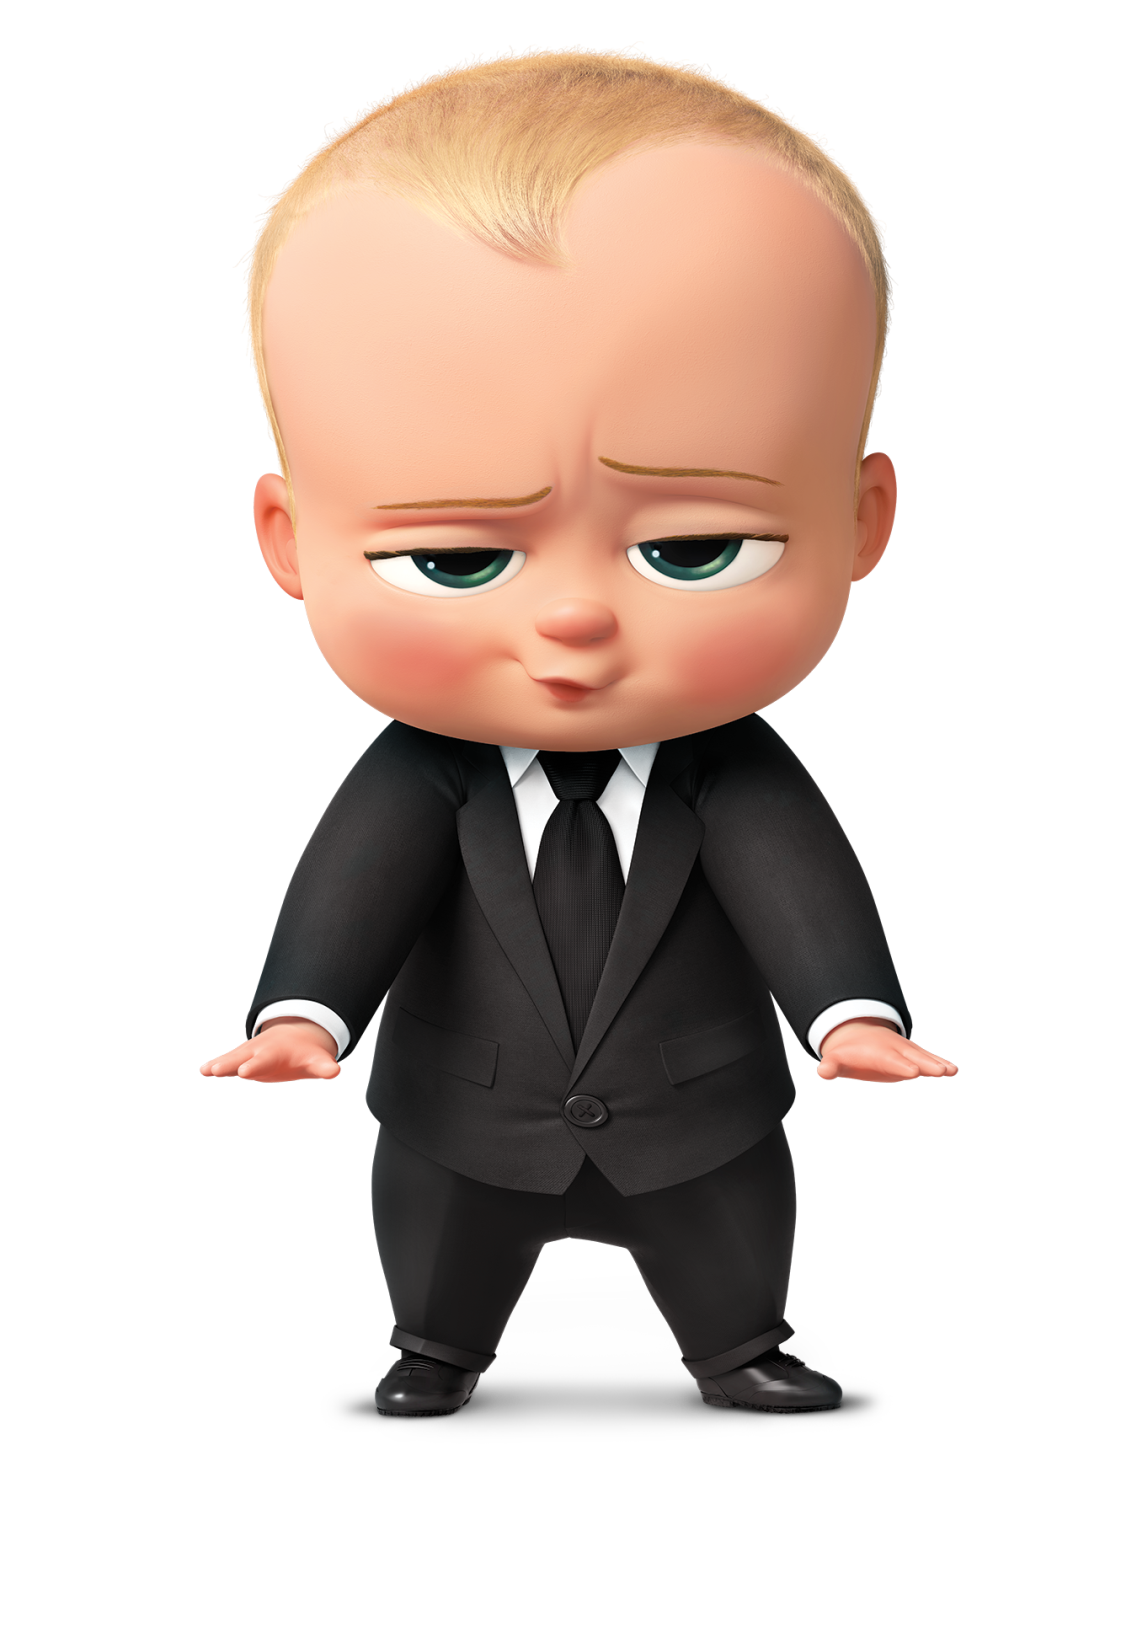 Download Infant Boss Diaper Child Baby The Clipart PNG Free